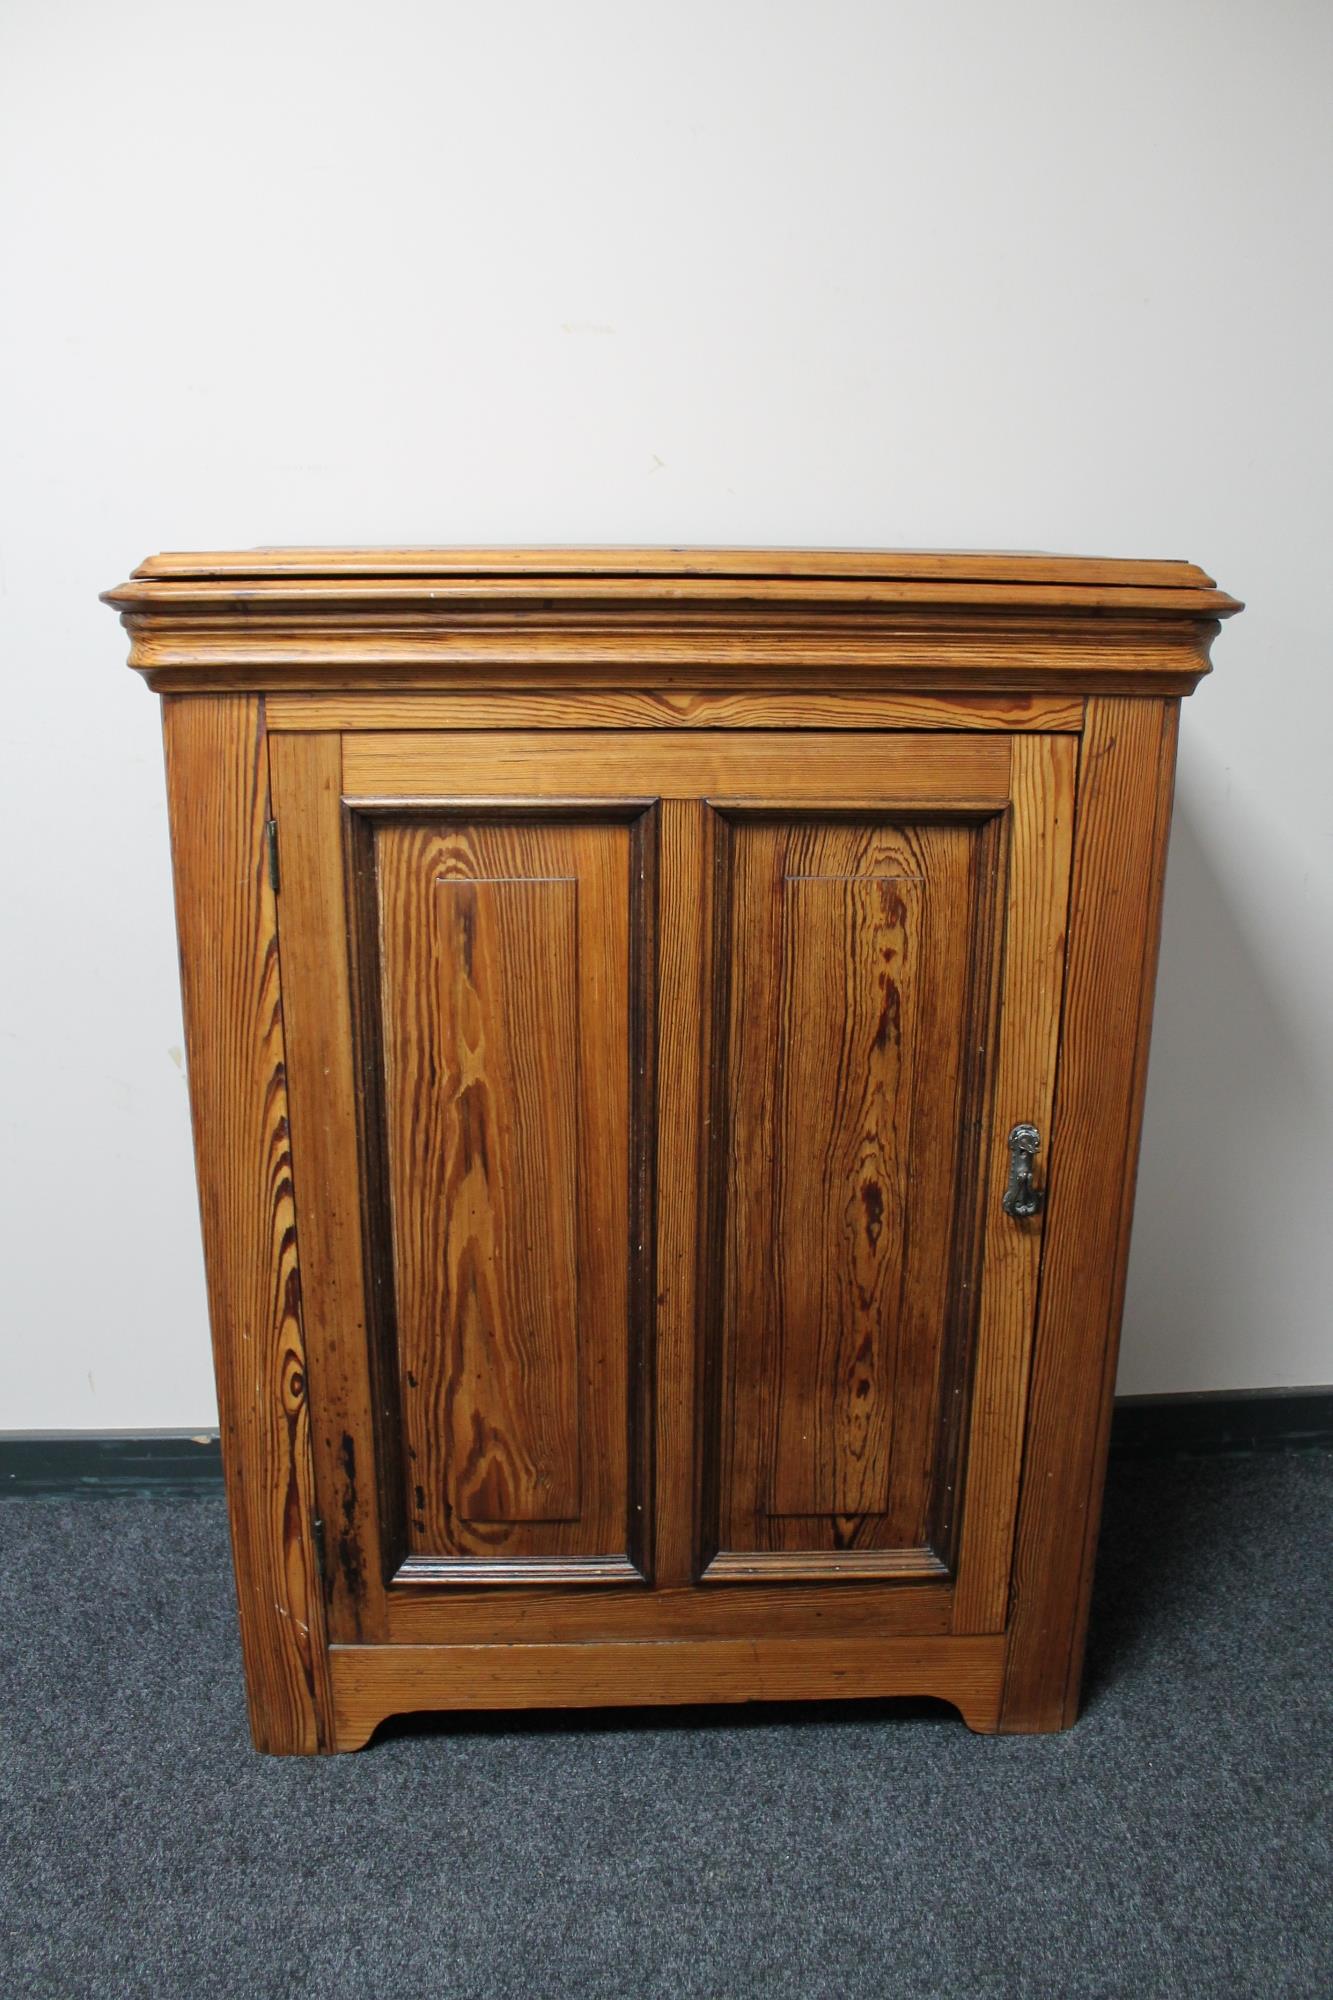 An antique pitch pine cabinet